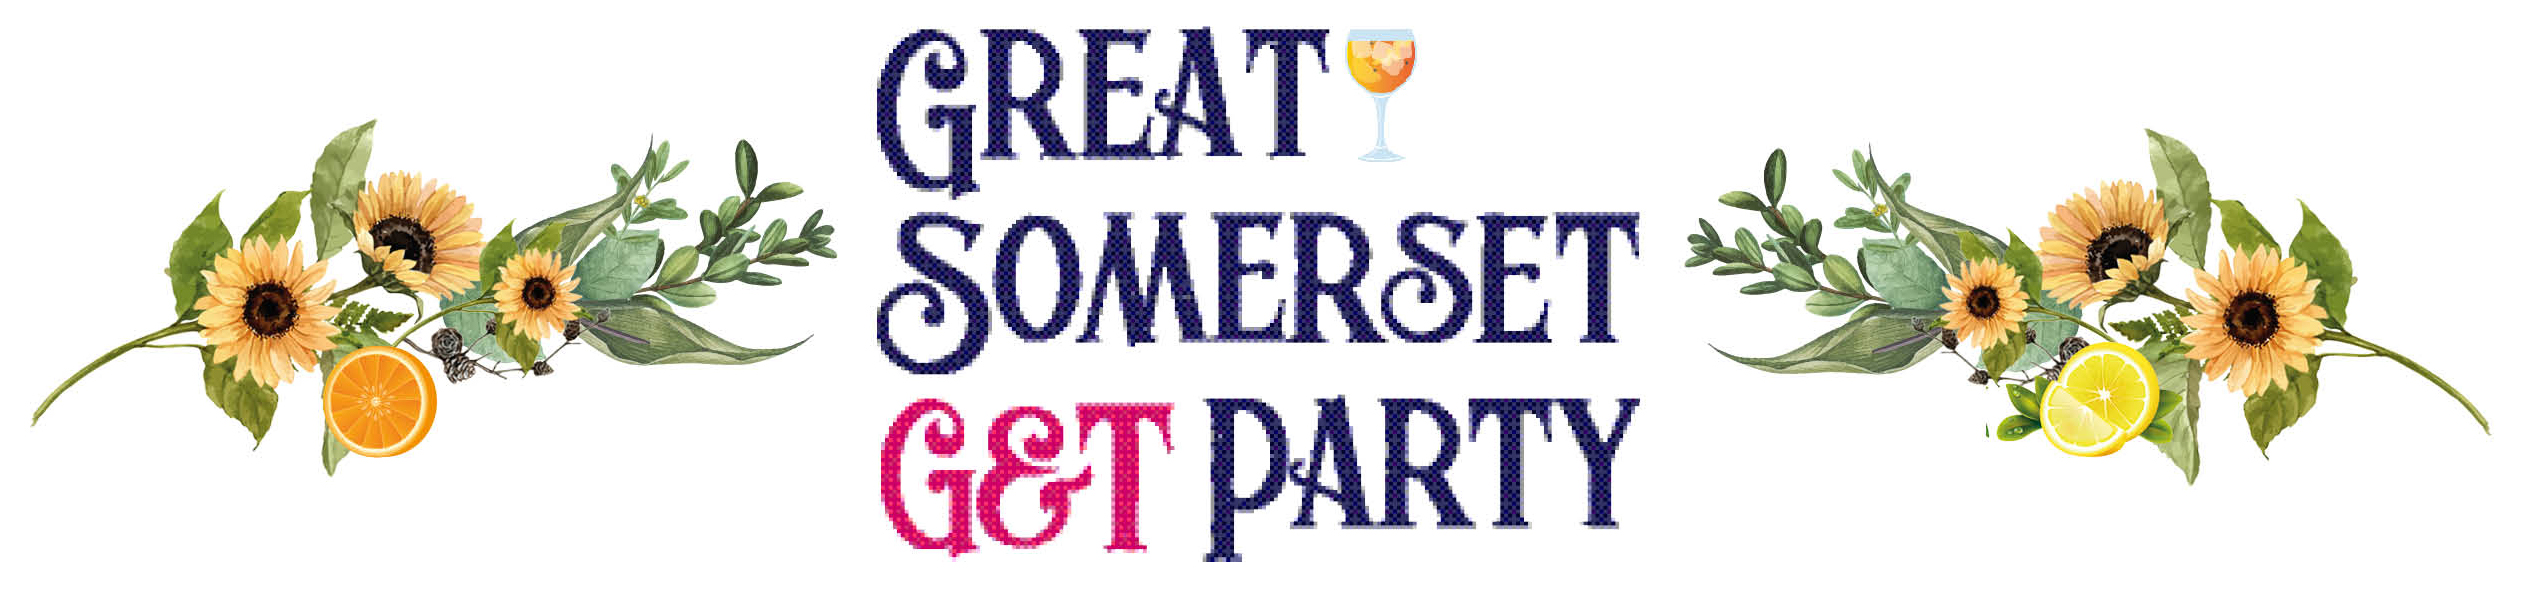 st margaret's hospice care great somerset g&t party 2021